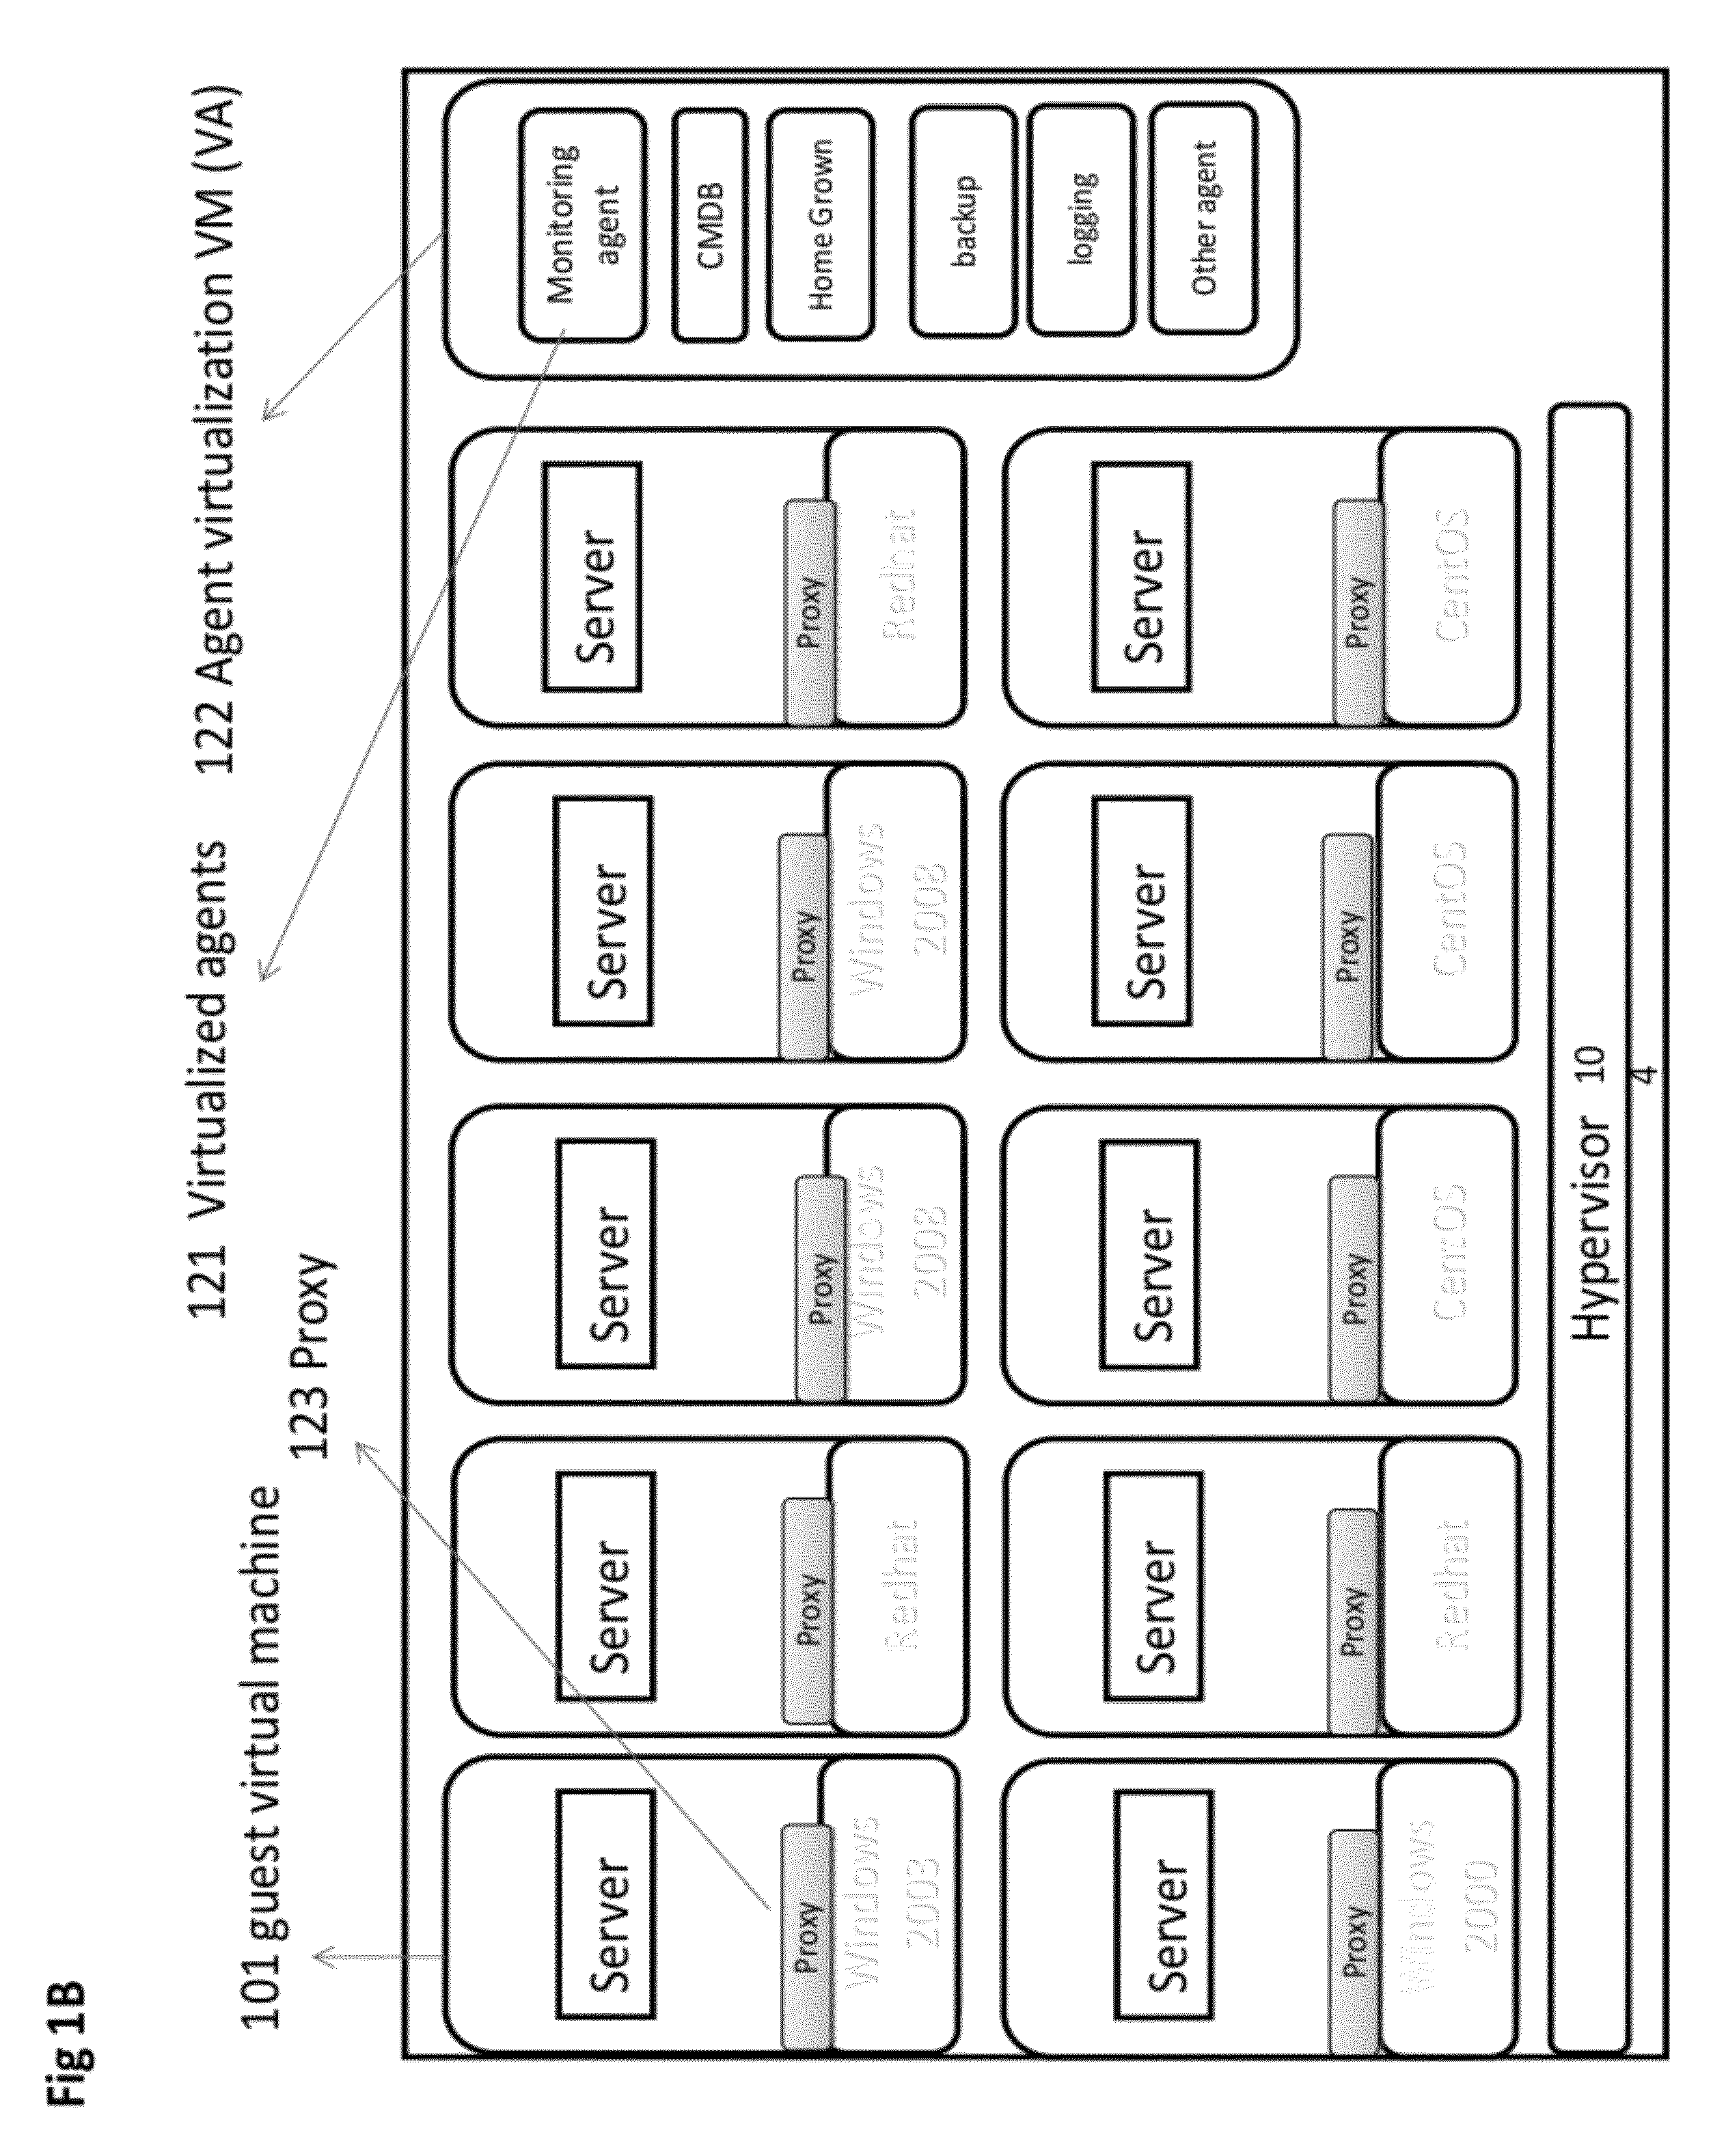 System and method for management of a virtual machine environment